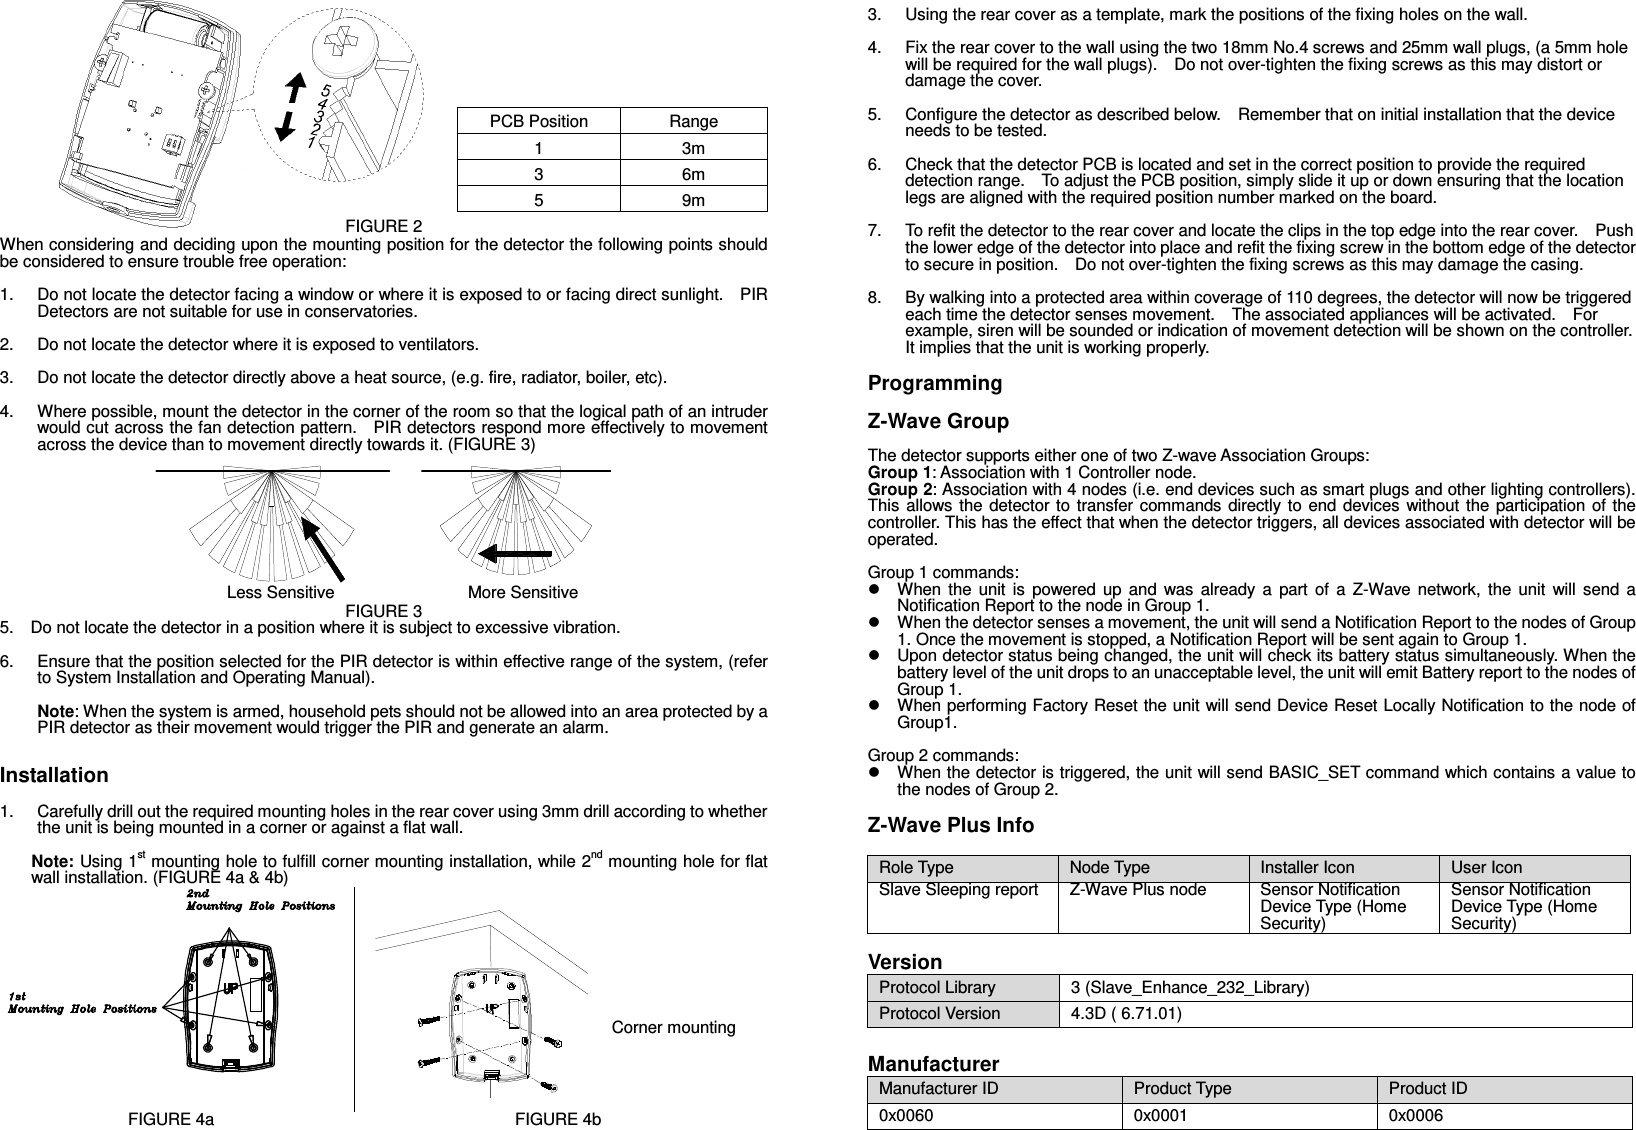     PCB Position  Range 1  3m 3  6m 5  9m FIGURE 2 When considering and deciding upon the mounting position for the detector the following points should be considered to ensure trouble free operation:  1.  Do not locate the detector facing a window or where it is exposed to or facing direct sunlight.    PIR Detectors are not suitable for use in conservatories.  2.  Do not locate the detector where it is exposed to ventilators.  3.  Do not locate the detector directly above a heat source, (e.g. fire, radiator, boiler, etc).  4.  Where possible, mount the detector in the corner of the room so that the logical path of an intruder would cut across the fan detection pattern.    PIR detectors respond more effectively to movement across the device than to movement directly towards it. (FIGURE 3)                             Less Sensitive                                More Sensitive FIGURE 3 5.    Do not locate the detector in a position where it is subject to excessive vibration.  6.  Ensure that the position selected for the PIR detector is within effective range of the system, (refer to System Installation and Operating Manual).  Note: When the system is armed, household pets should not be allowed into an area protected by a PIR detector as their movement would trigger the PIR and generate an alarm.  Installation  1.  Carefully drill out the required mounting holes in the rear cover using 3mm drill according to whether the unit is being mounted in a corner or against a flat wall.  Note: Using 1st mounting hole to fulfill corner mounting installation, while 2nd mounting hole for flat wall installation. (FIGURE 4a &amp; 4b)    FIGURE 4a FIGURE 4b 3.  Using the rear cover as a template, mark the positions of the fixing holes on the wall.  4.  Fix the rear cover to the wall using the two 18mm No.4 screws and 25mm wall plugs, (a 5mm hole will be required for the wall plugs).    Do not over-tighten the fixing screws as this may distort or damage the cover.  5.  Configure the detector as described below.    Remember that on initial installation that the device needs to be tested.  6.  Check that the detector PCB is located and set in the correct position to provide the required detection range.    To adjust the PCB position, simply slide it up or down ensuring that the location legs are aligned with the required position number marked on the board.  7.  To refit the detector to the rear cover and locate the clips in the top edge into the rear cover.    Push the lower edge of the detector into place and refit the fixing screw in the bottom edge of the detector to secure in position.    Do not over-tighten the fixing screws as this may damage the casing.  8.  By walking into a protected area within coverage of 110 degrees, the detector will now be triggered each time the detector senses movement.    The associated appliances will be activated.    For example, siren will be sounded or indication of movement detection will be shown on the controller.   It implies that the unit is working properly.    Programming  Z-Wave Group  The detector supports either one of two Z-wave Association Groups: Group 1: Association with 1 Controller node. Group 2: Association with 4 nodes (i.e. end devices such as smart plugs and other lighting controllers). This  allows the  detector to  transfer commands  directly to  end  devices without  the  participation of  the controller. This has the effect that when the detector triggers, all devices associated with detector will be operated.  Group 1 commands:   When  the  unit  is  powered  up  and  was  already  a  part  of  a  Z-Wave  network,  the  unit  will  send  a Notification Report to the node in Group 1.   When the detector senses a movement, the unit will send a Notification Report to the nodes of Group 1. Once the movement is stopped, a Notification Report will be sent again to Group 1.   Upon detector status being changed, the unit will check its battery status simultaneously. When the battery level of the unit drops to an unacceptable level, the unit will emit Battery report to the nodes of Group 1.   When performing Factory Reset the unit will send Device Reset Locally Notification to the node of Group1.    Group 2 commands:   When the detector is triggered, the unit will send BASIC_SET command which contains a value to the nodes of Group 2.  Z-Wave Plus Info  Role Type  Node Type  Installer Icon  User Icon Slave Sleeping report Z-Wave Plus node Sensor Notification Device Type (Home Security) Sensor Notification Device Type (Home Security)  Version Protocol Library  3 (Slave_Enhance_232_Library) Protocol Version  4.3D ( 6.71.01)  Manufacturer Manufacturer ID  Product Type  Product ID 0x0060  0x0001  0x0006 Corner mounting 